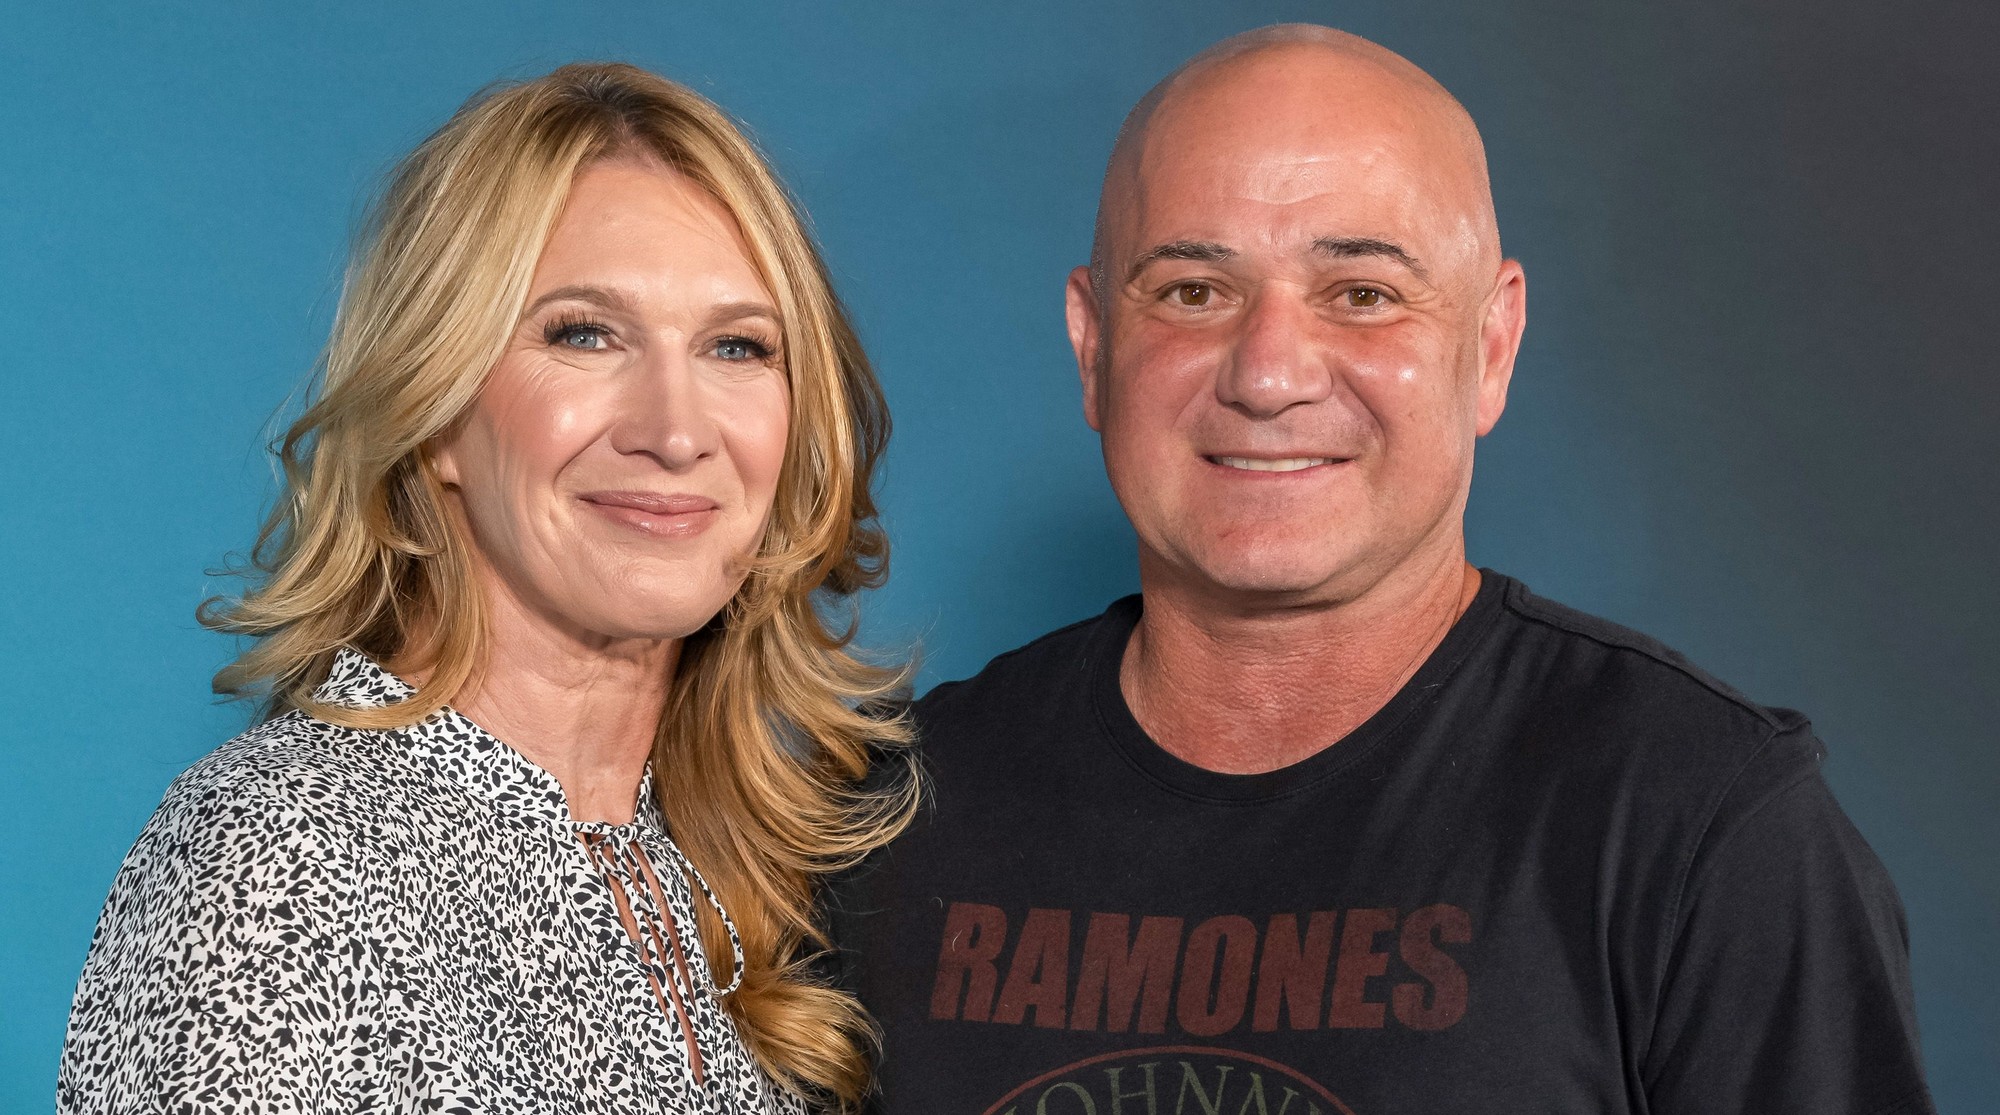 Are Steffi Graf and Andre Agassi Still a Couple After Winning Roland Garros in 1999?